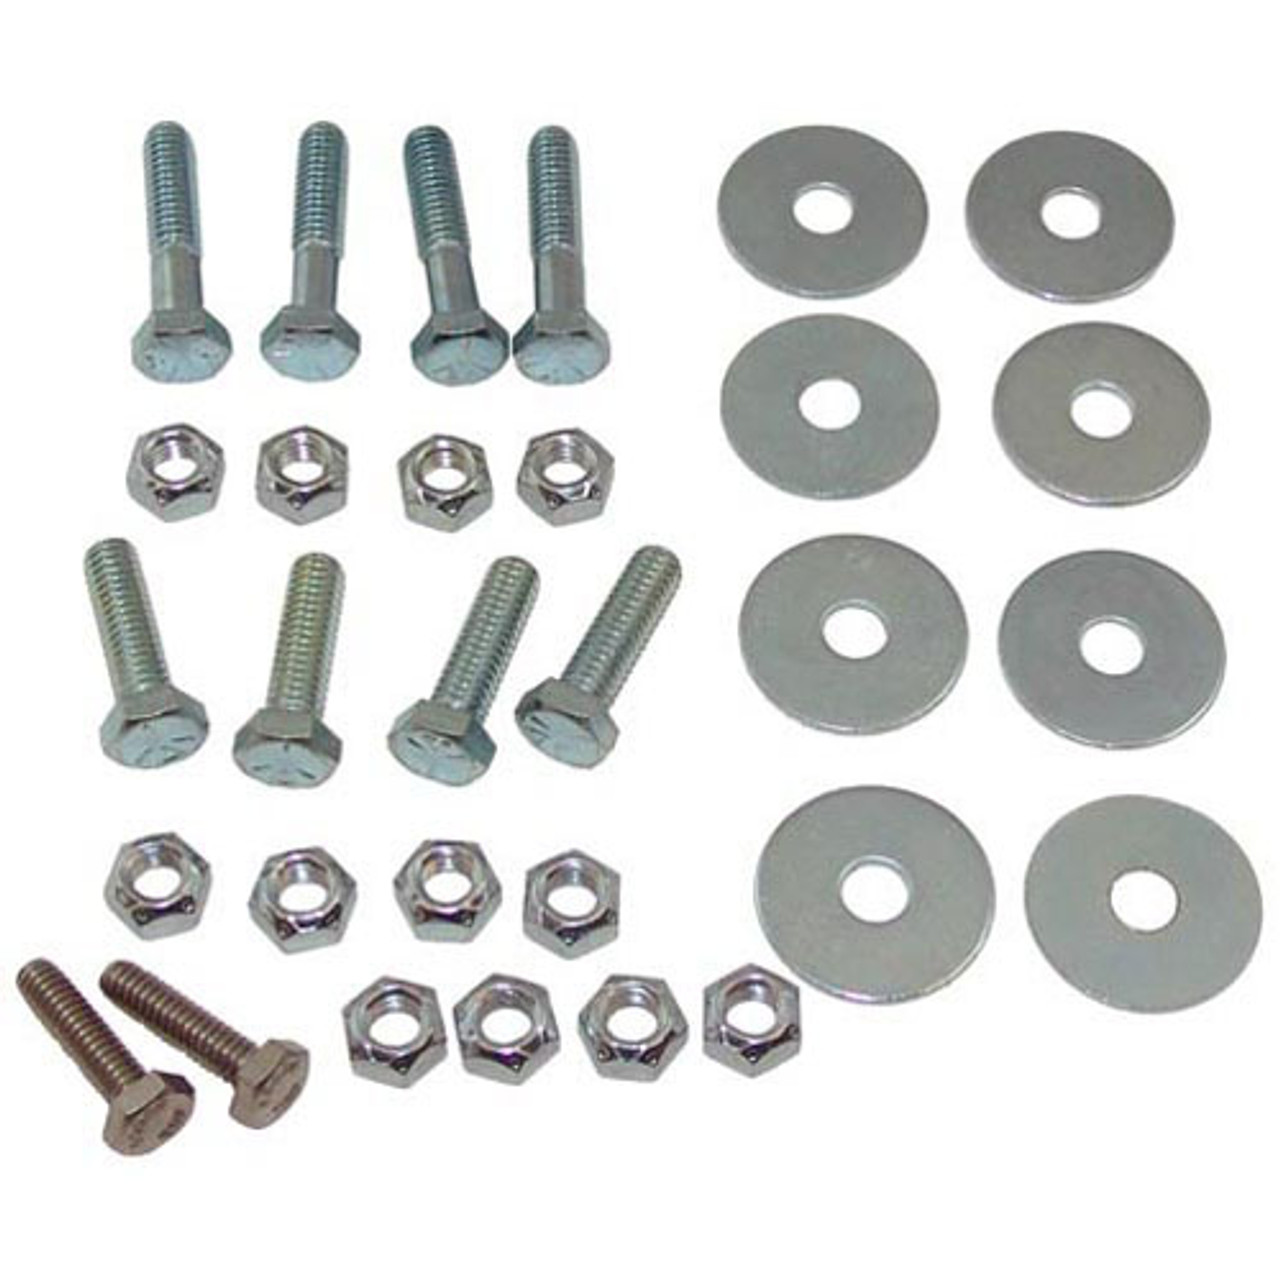 Hardware Kit - Replacement Part For Hobart 00-347119-00001